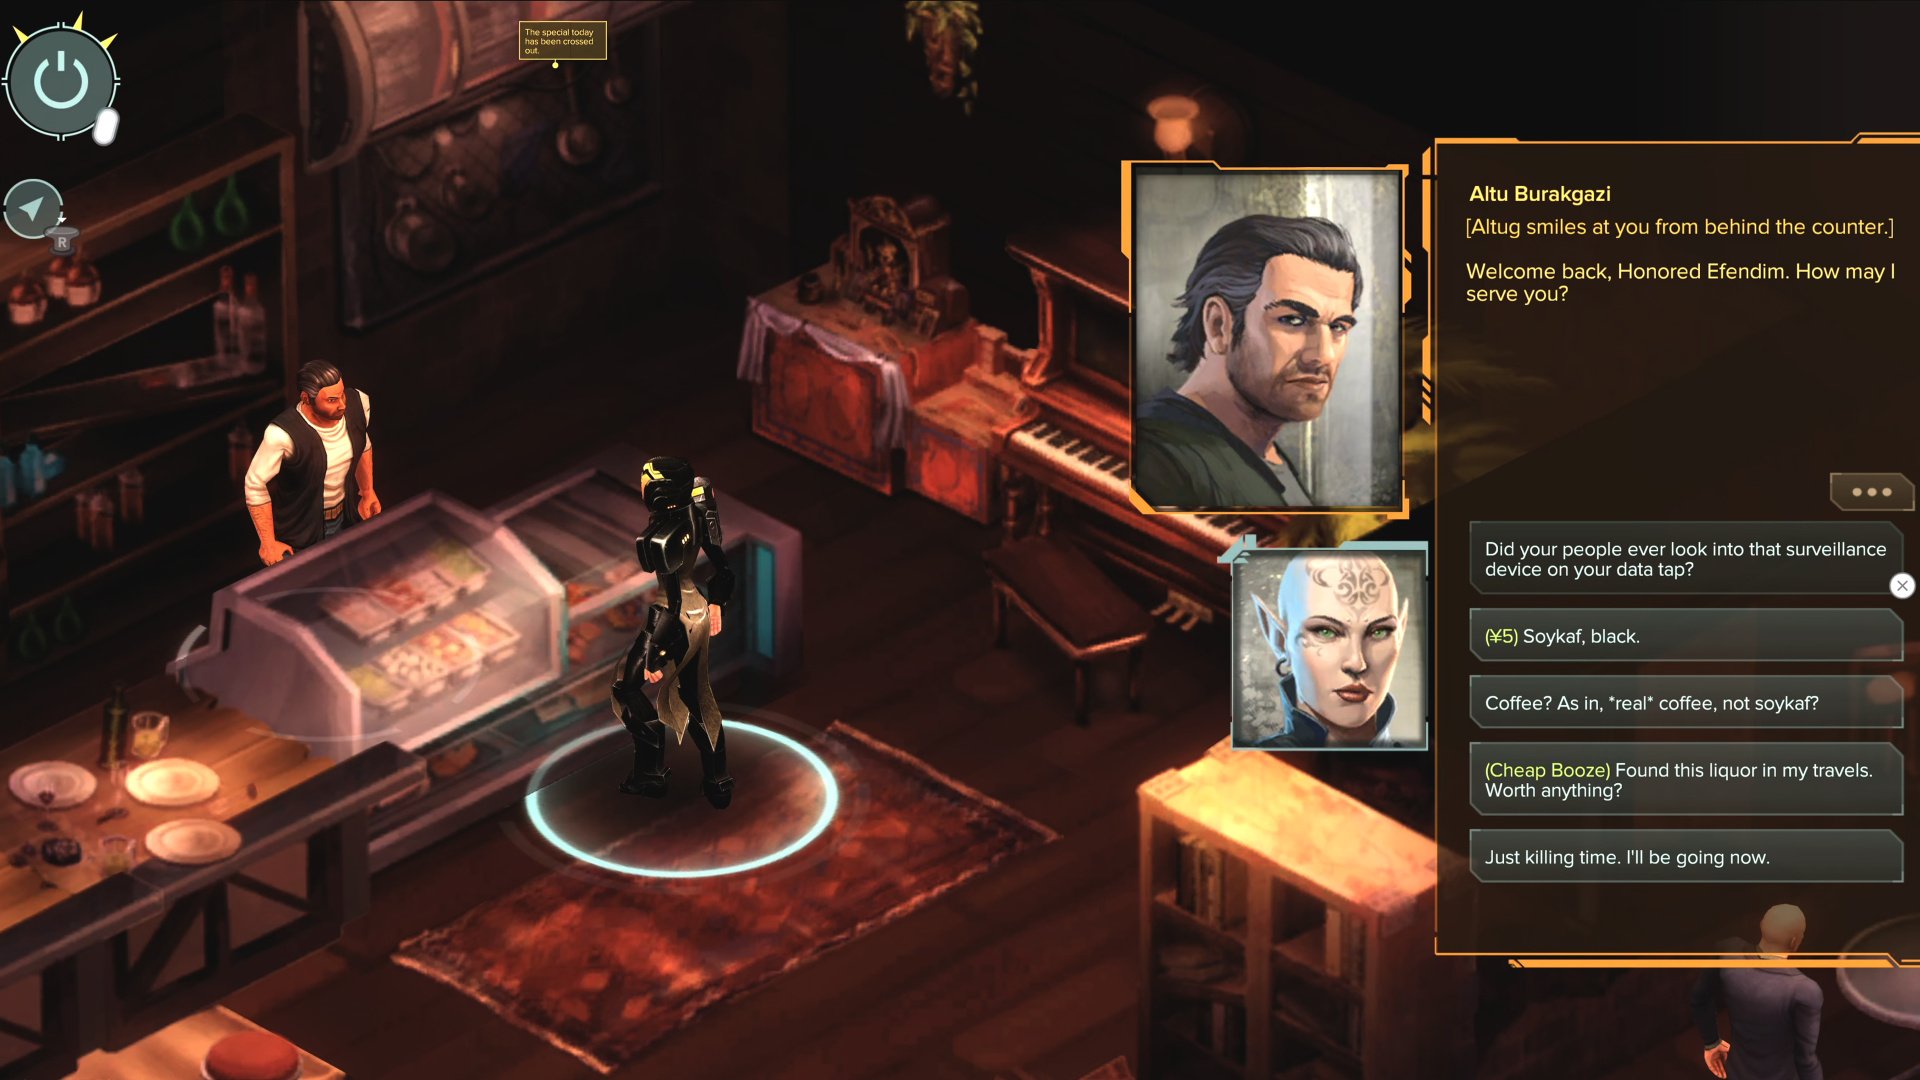 Shadowrun Returns campaign Dragonfall released as standalone tactical RPG